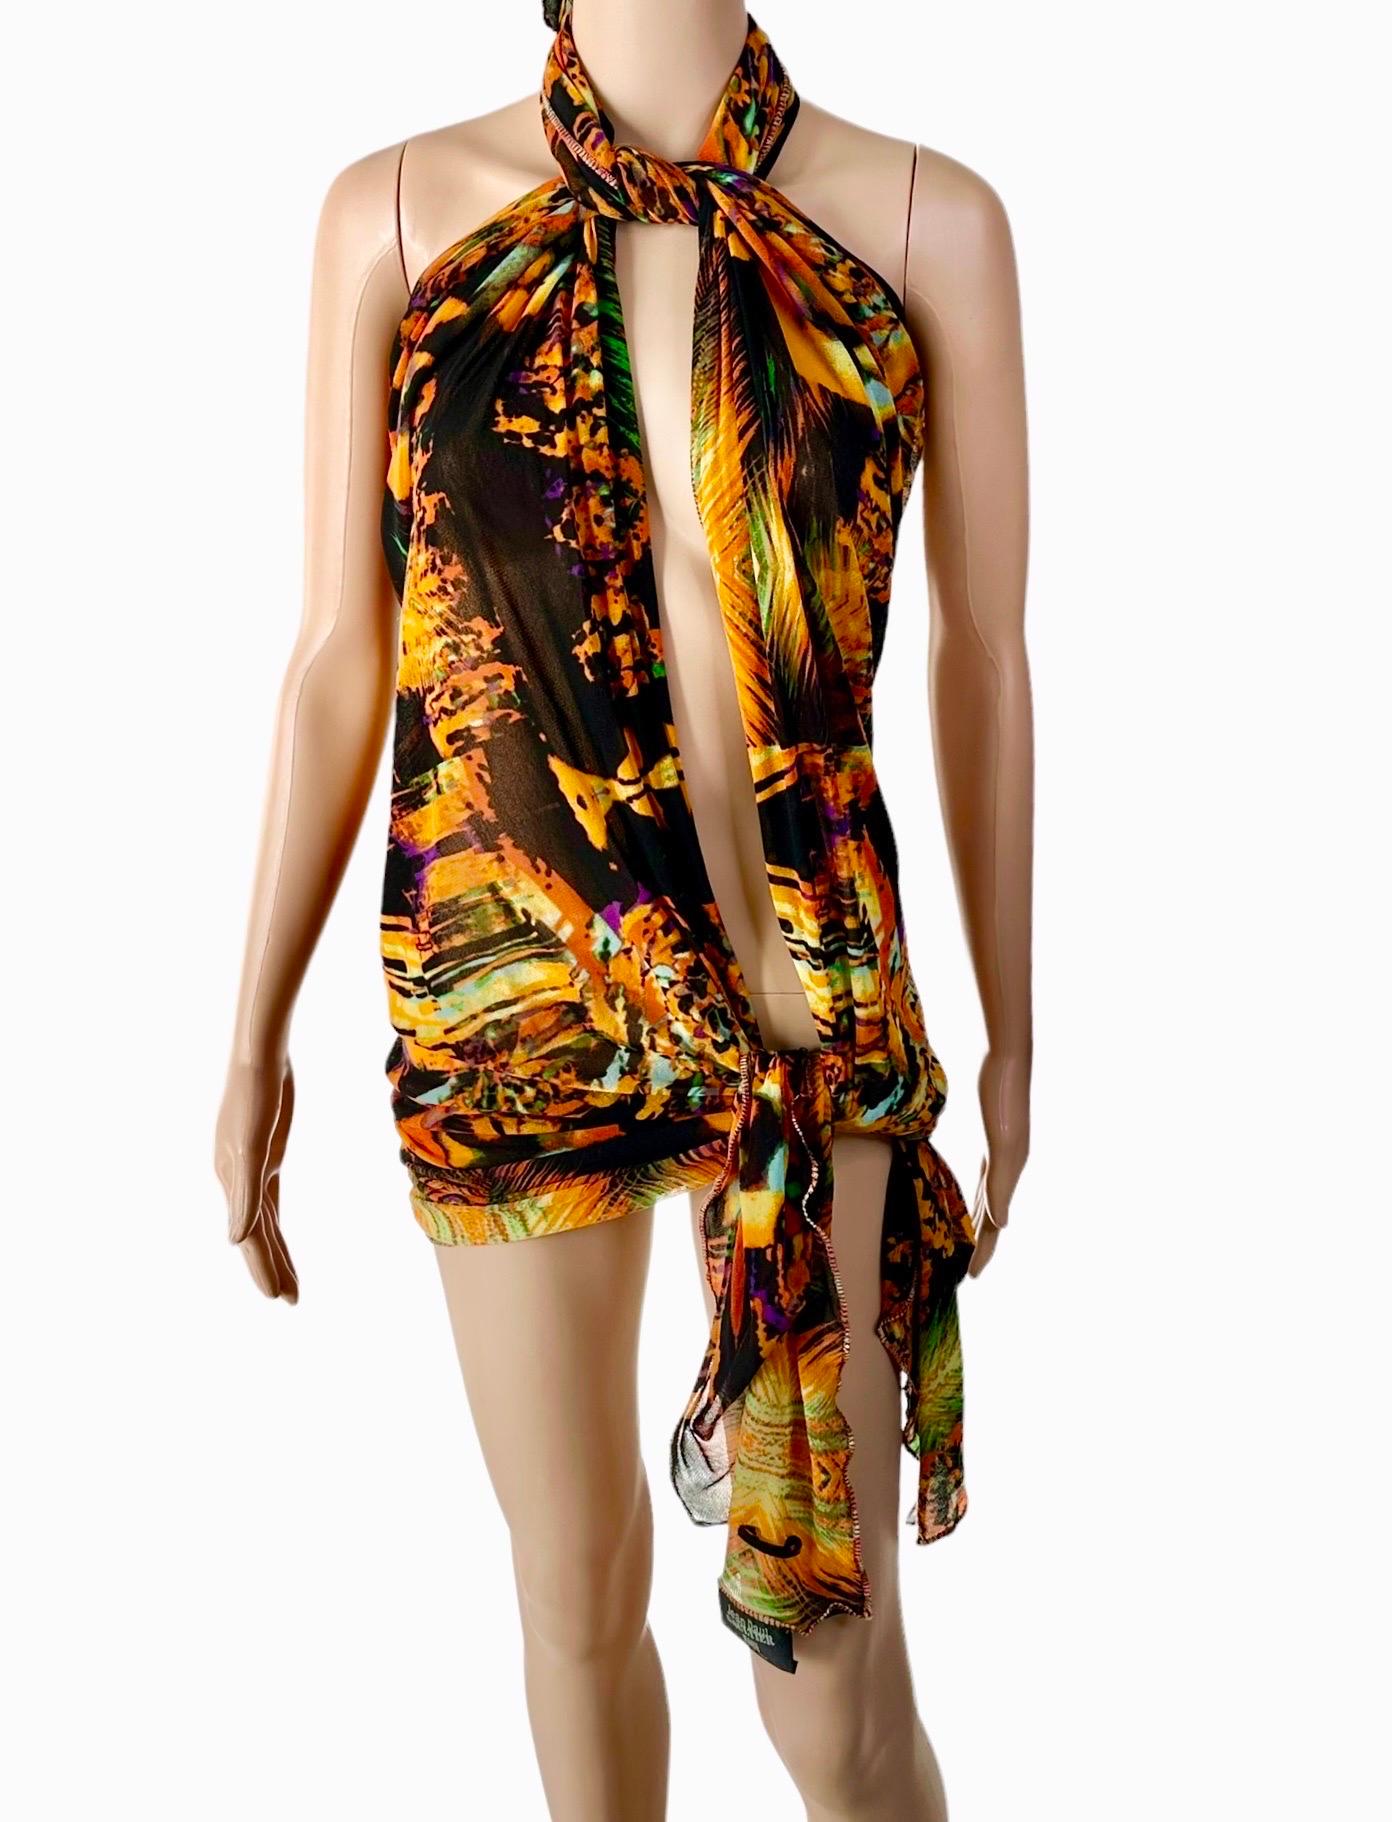 Jean Paul Gaultier S/S 2000 Psychedelic Print Mesh Wrap Dress Scarf Sarong Pareo 6